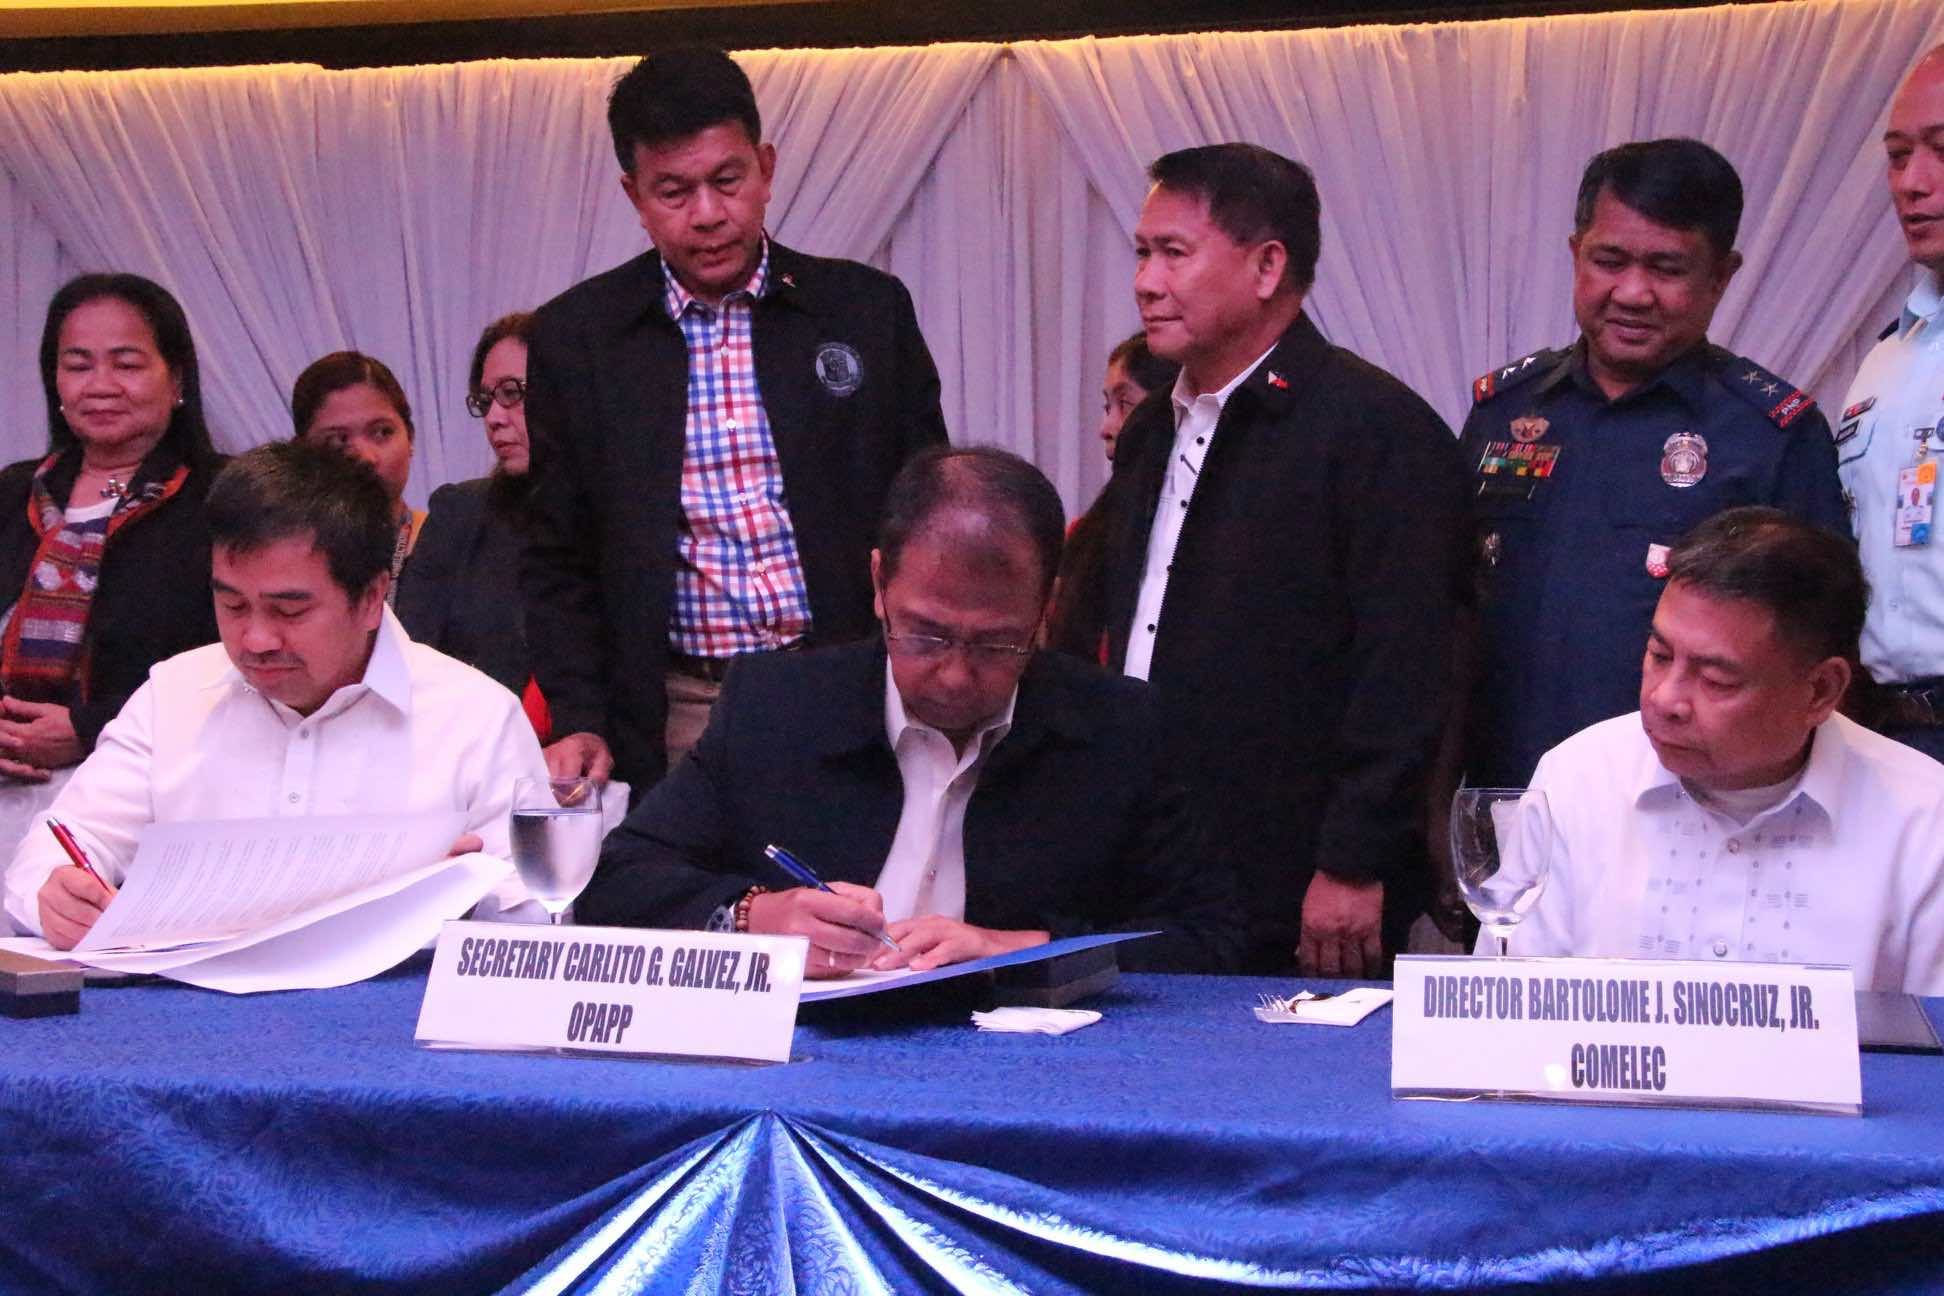 A month before Bangsamoro plebiscite, gov’t entities sign deal on info drive